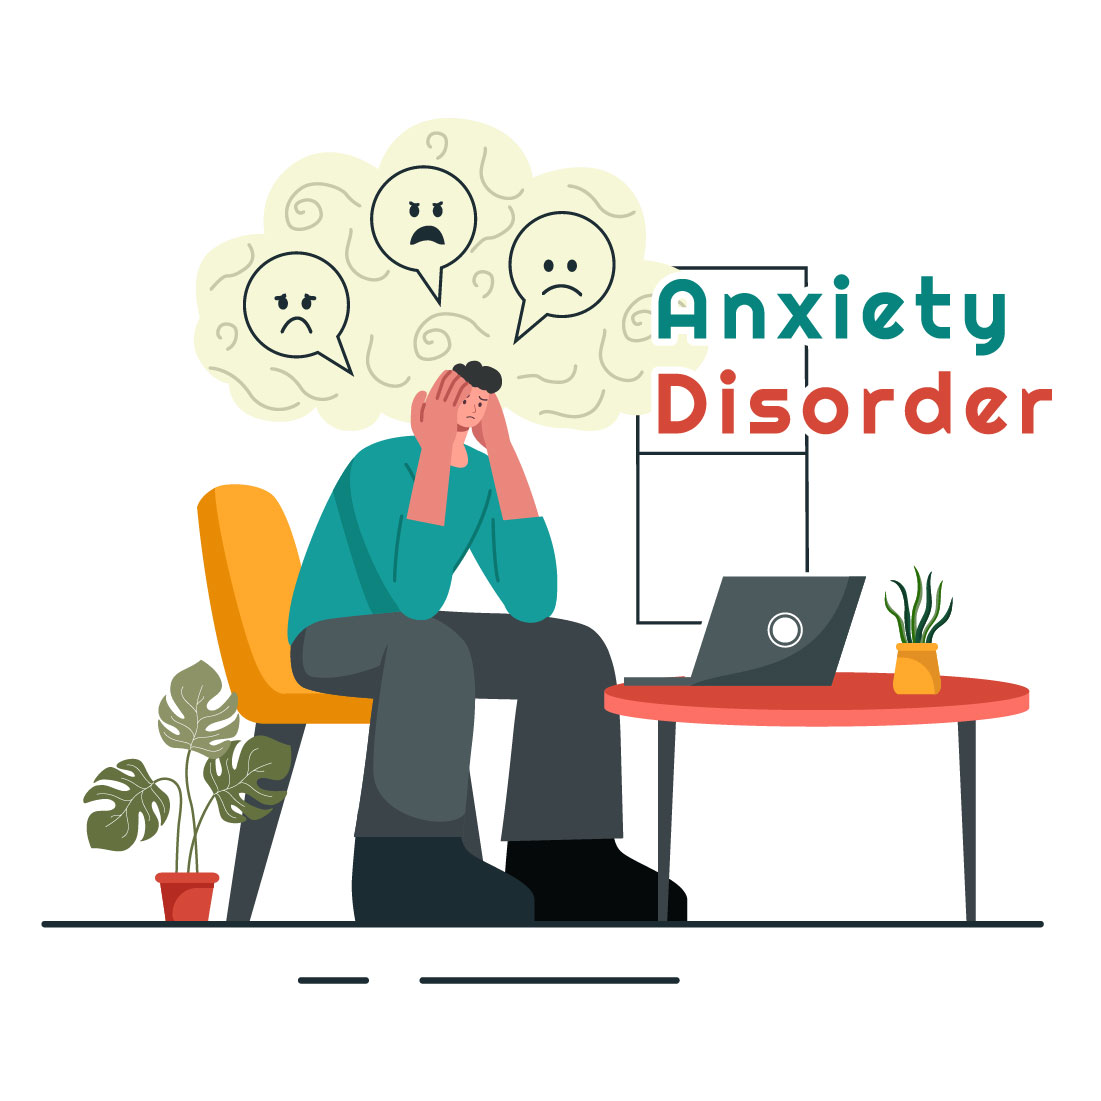 9 Anxiety Disorder Illustration cover image.